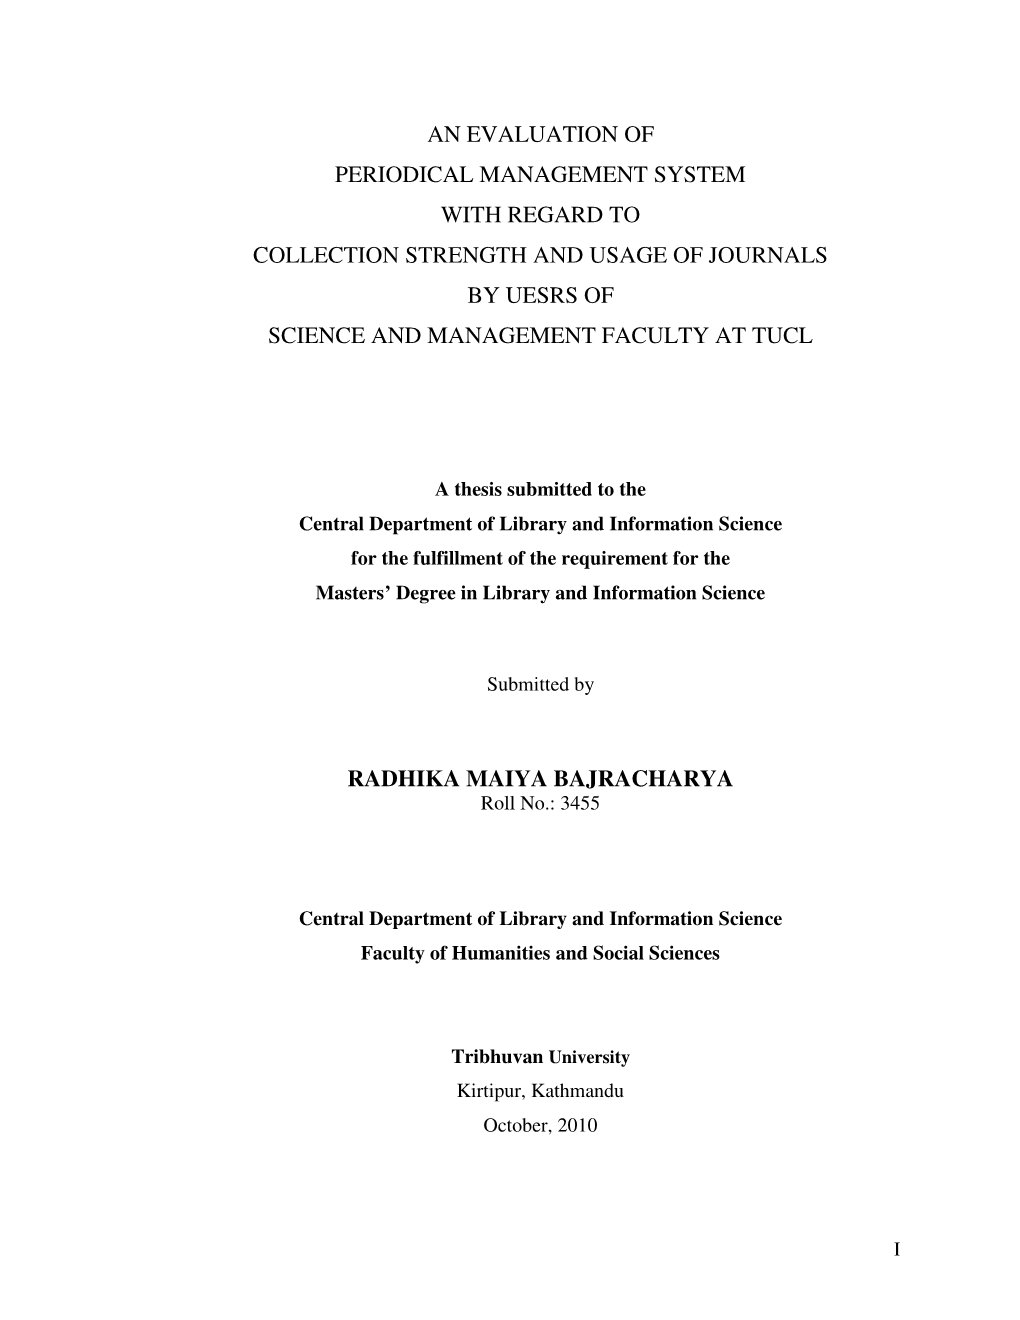 An Evaluation of Periodical Management System with Regard to Collection Strength and Usage of Journals by Uesrs of Science and Management Faculty at Tucl